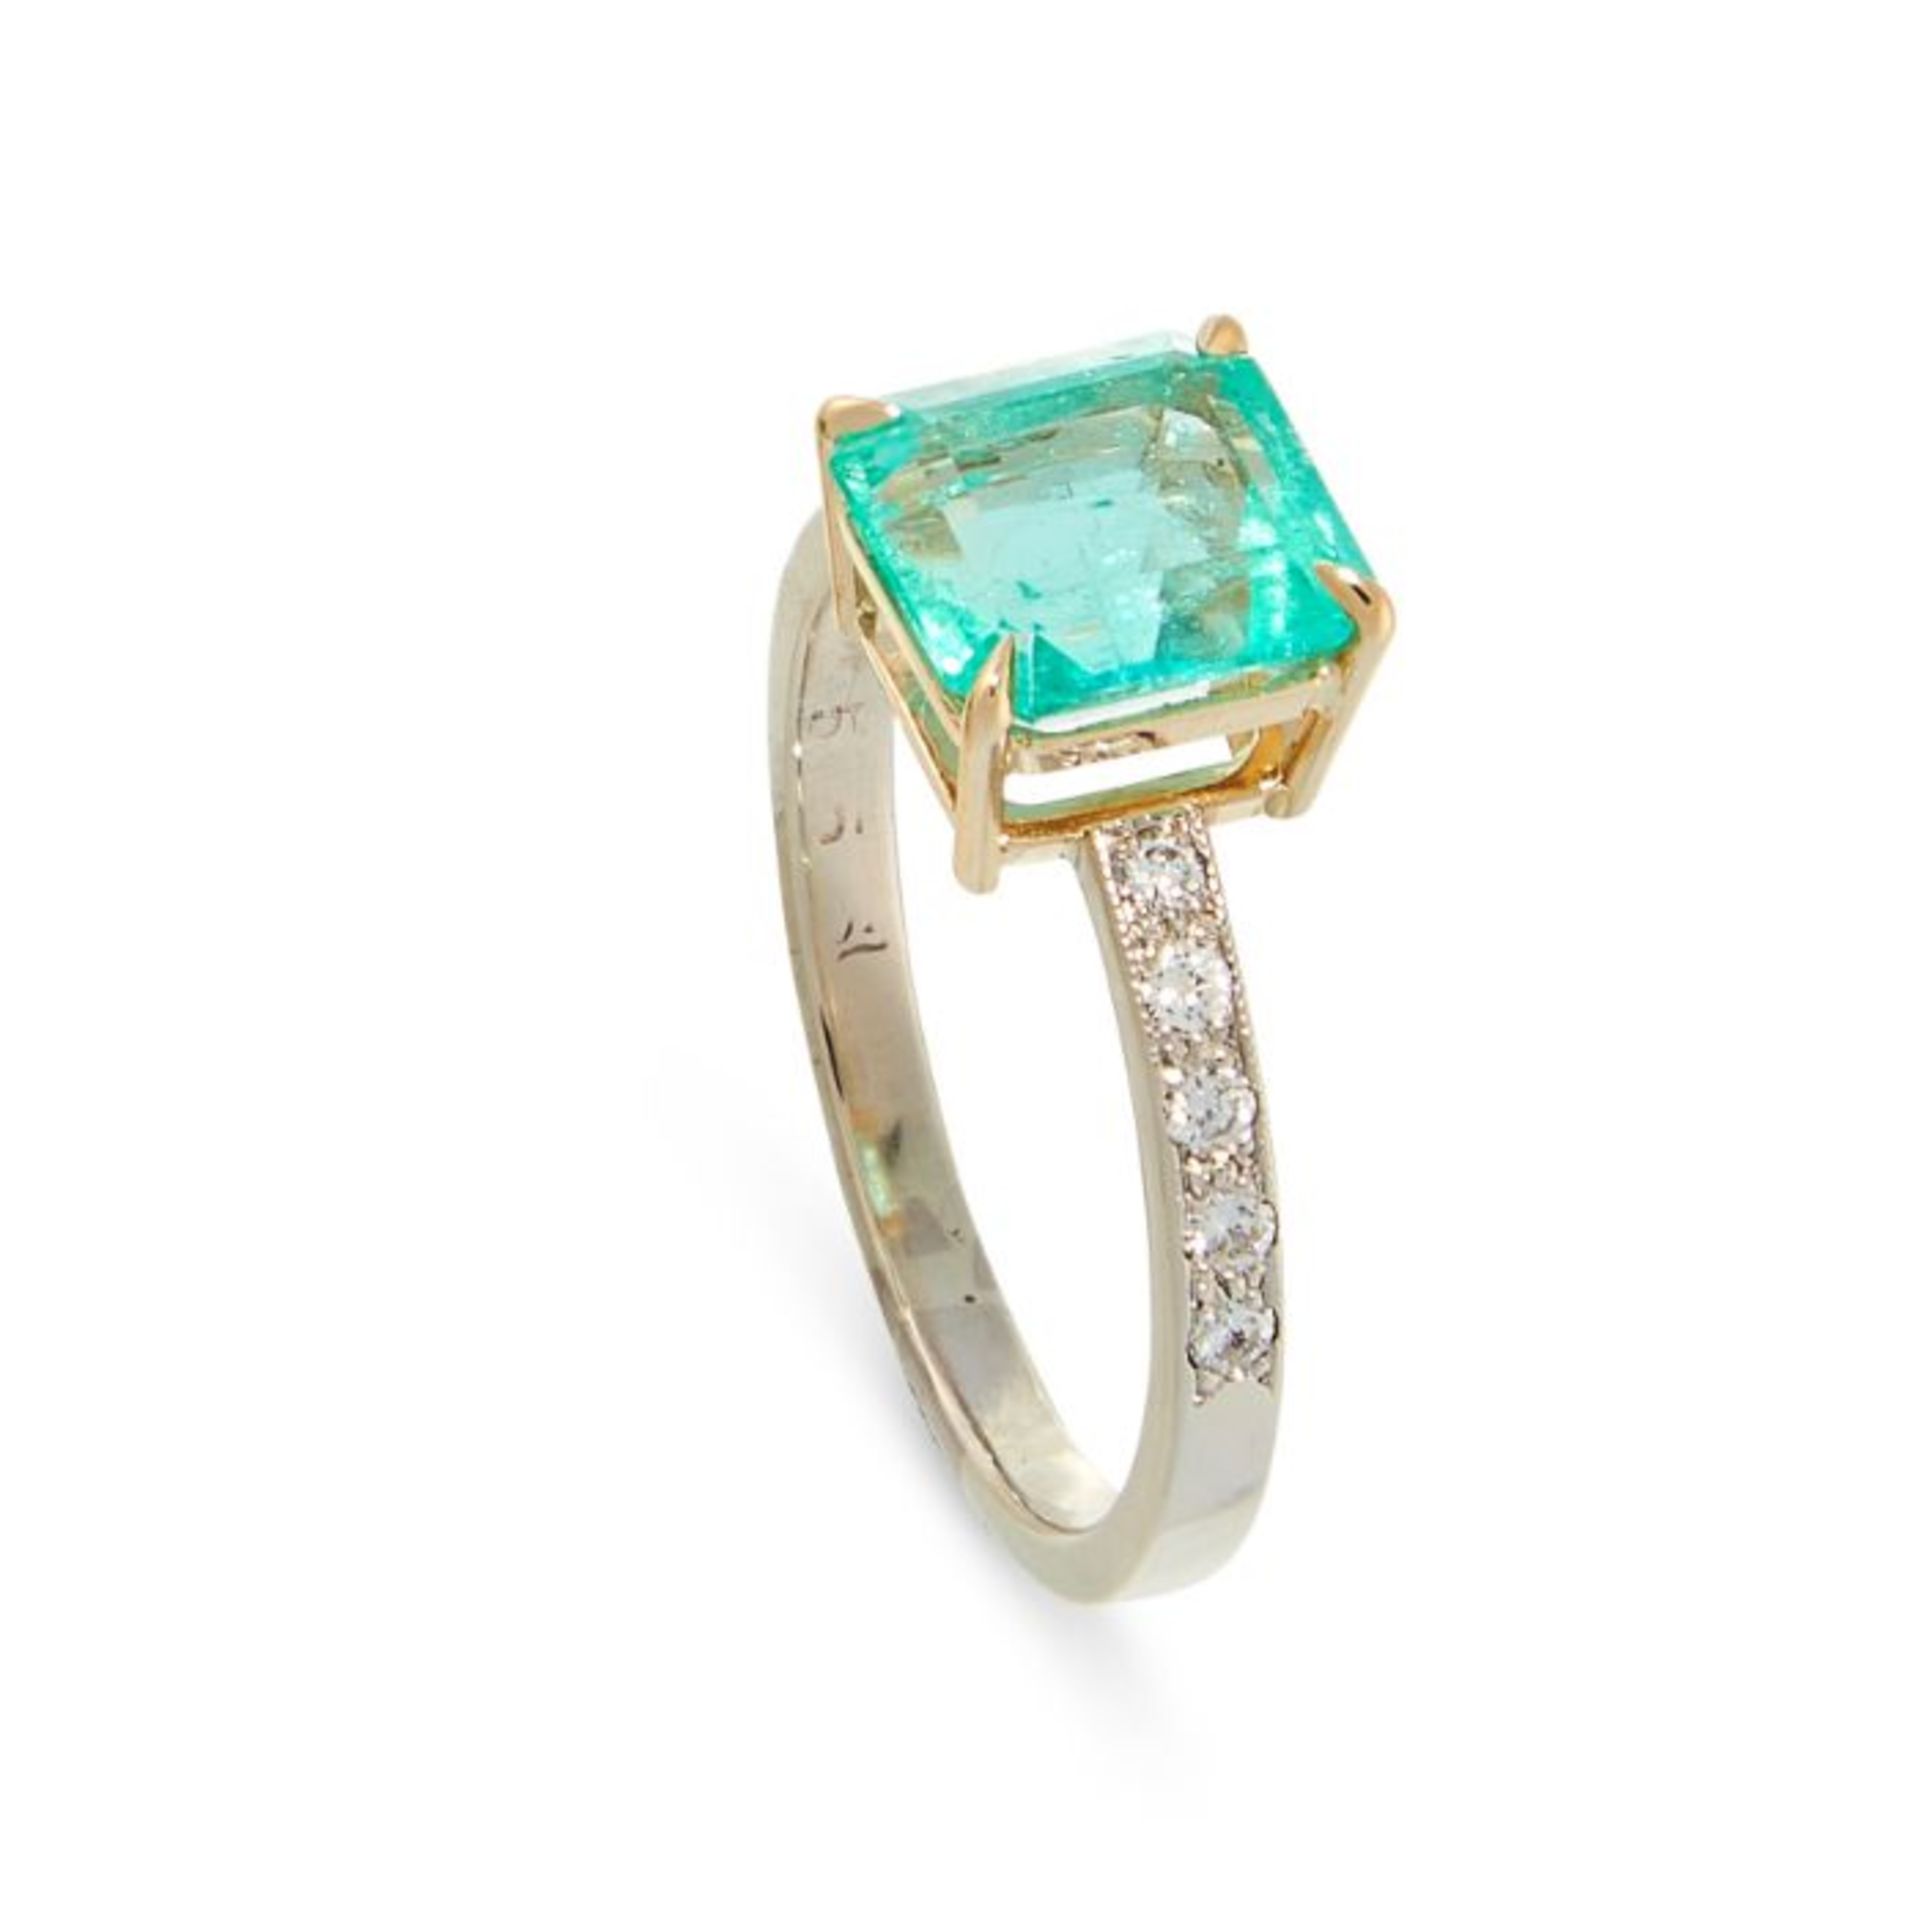 A COLOMBIAN EMERALD AND DIAMOND RING set with an emerald cut emerald of 2.00 carats, with round - Bild 2 aus 2